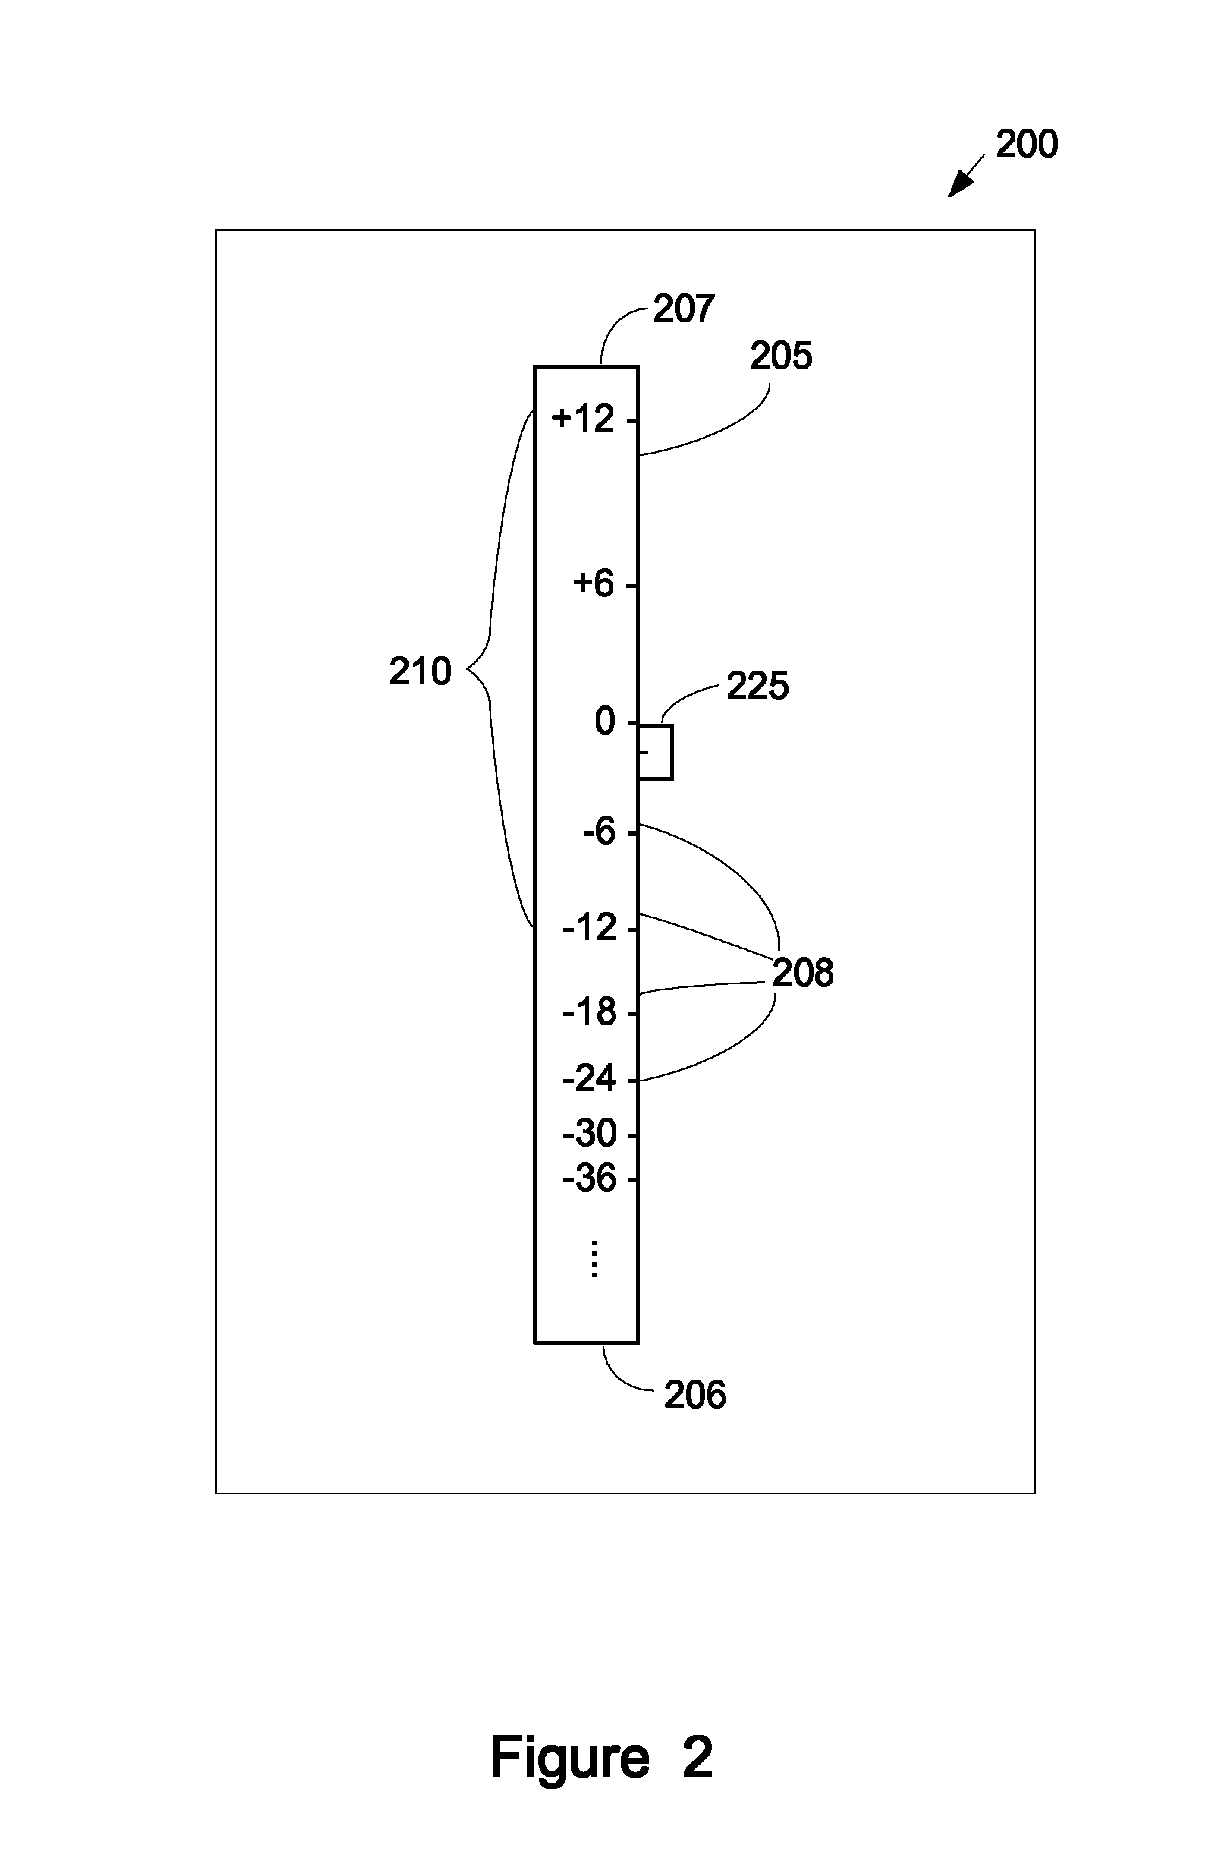 Method and apparatus for displaying a gain control interface with non-linear gain levels